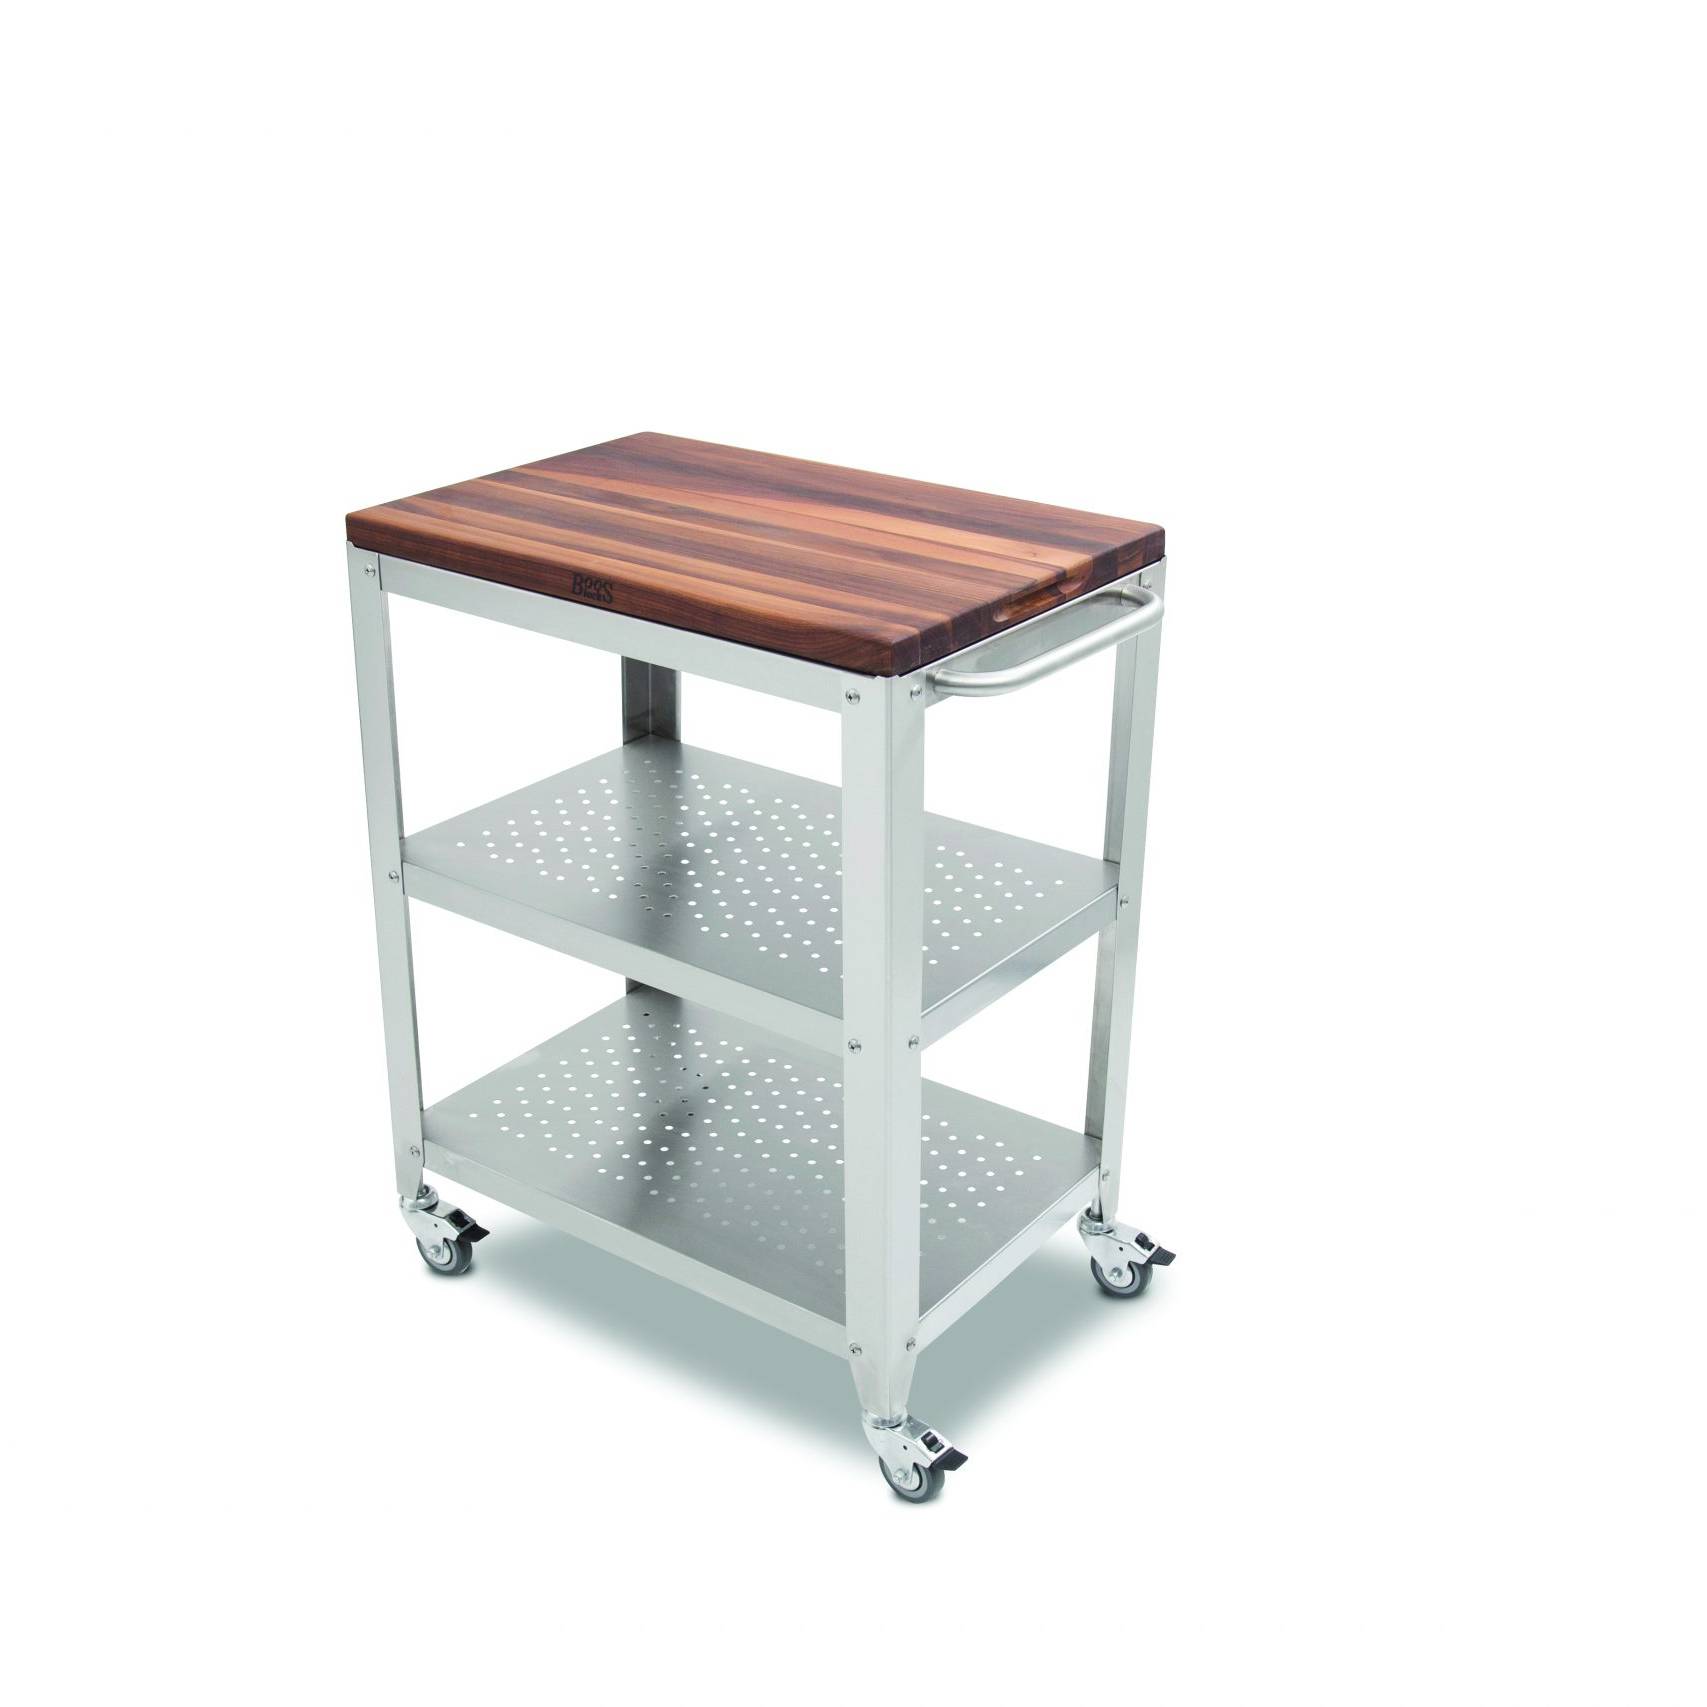 CULINARTE Kitchen &amp; Serving Cart with Removable Black Walnut Long Wood Cutting Board; Stainless Steel Base with Drawer and 2 Shelves, Towel Holder; Lockable Casters 5